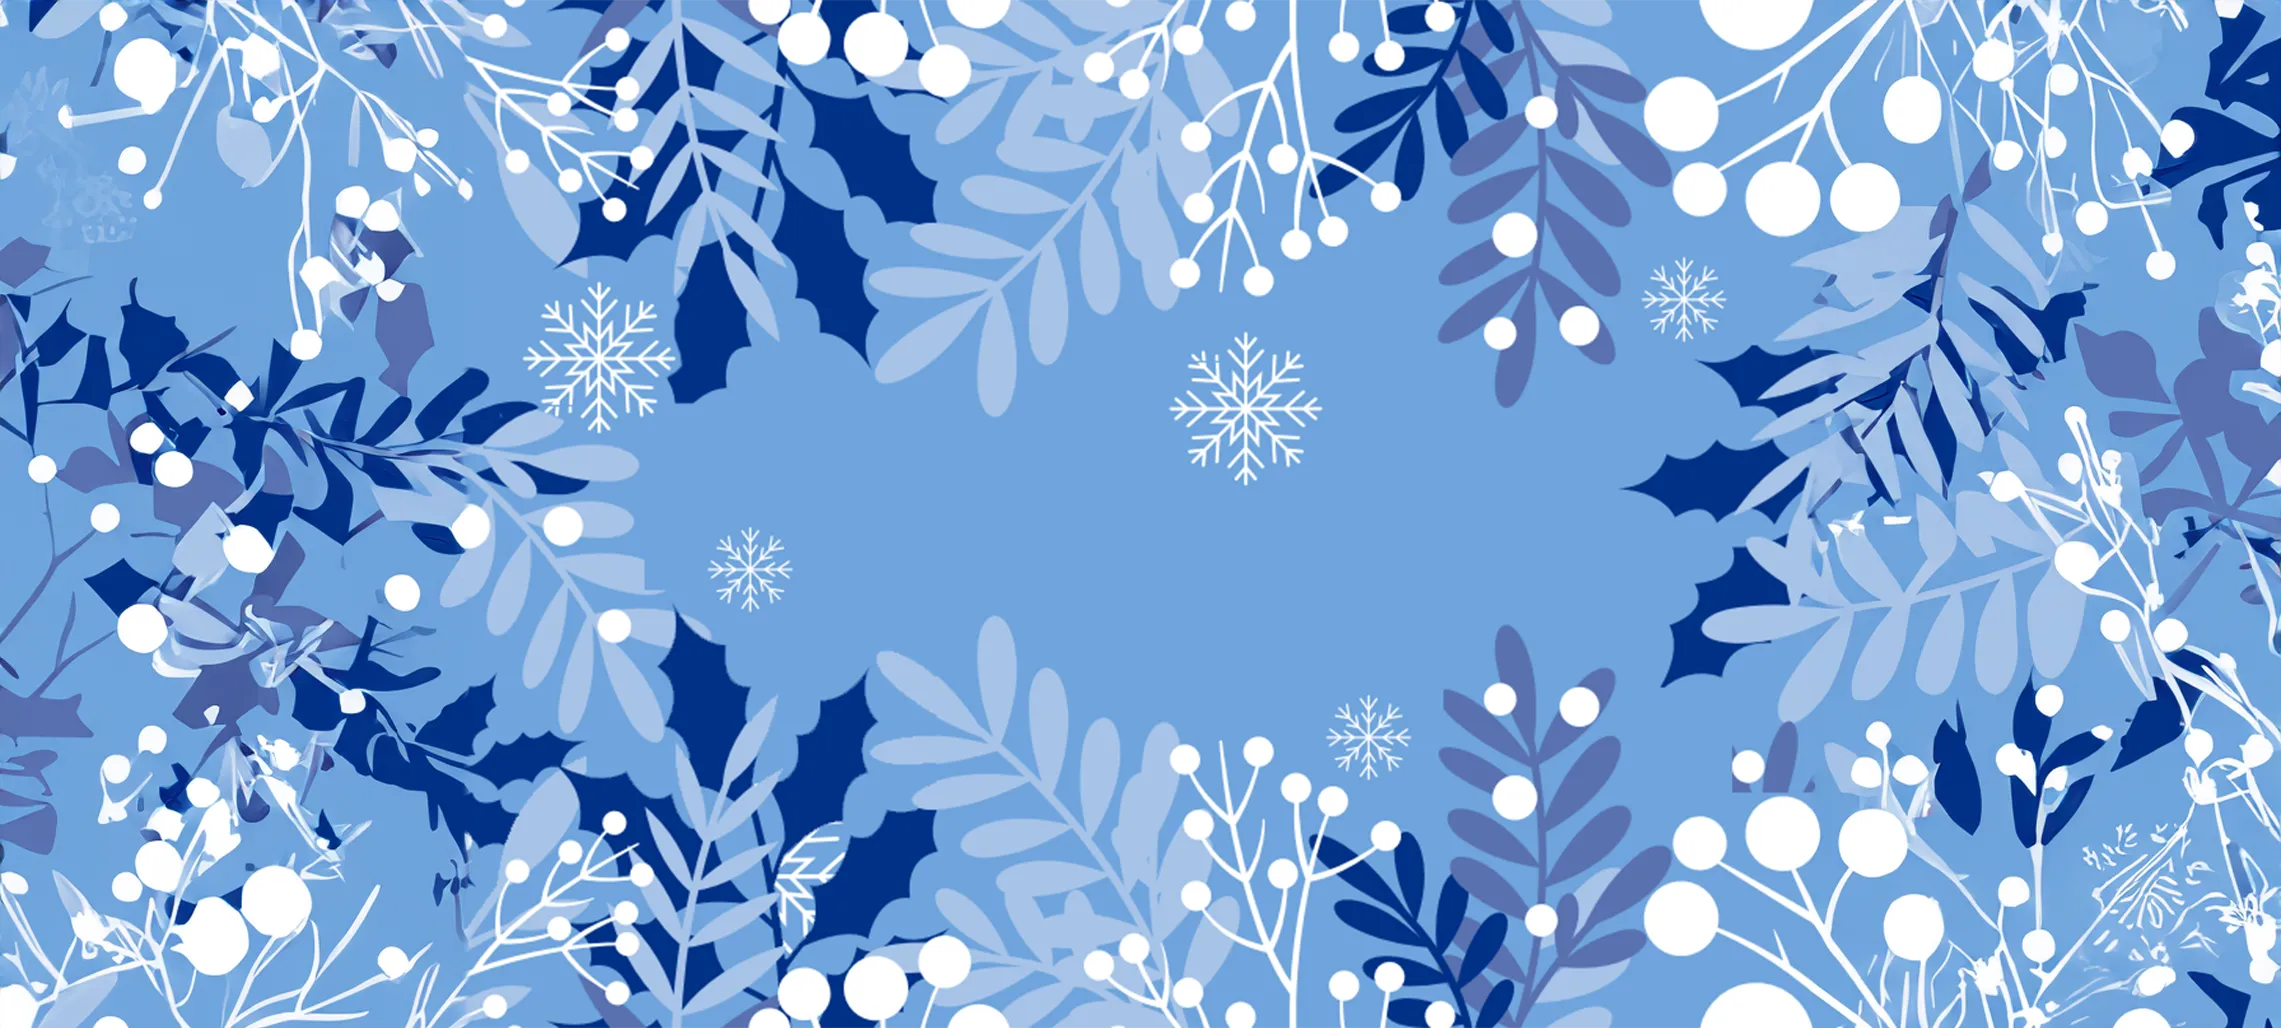 A festive winter holiday background consisting of blues and whites.